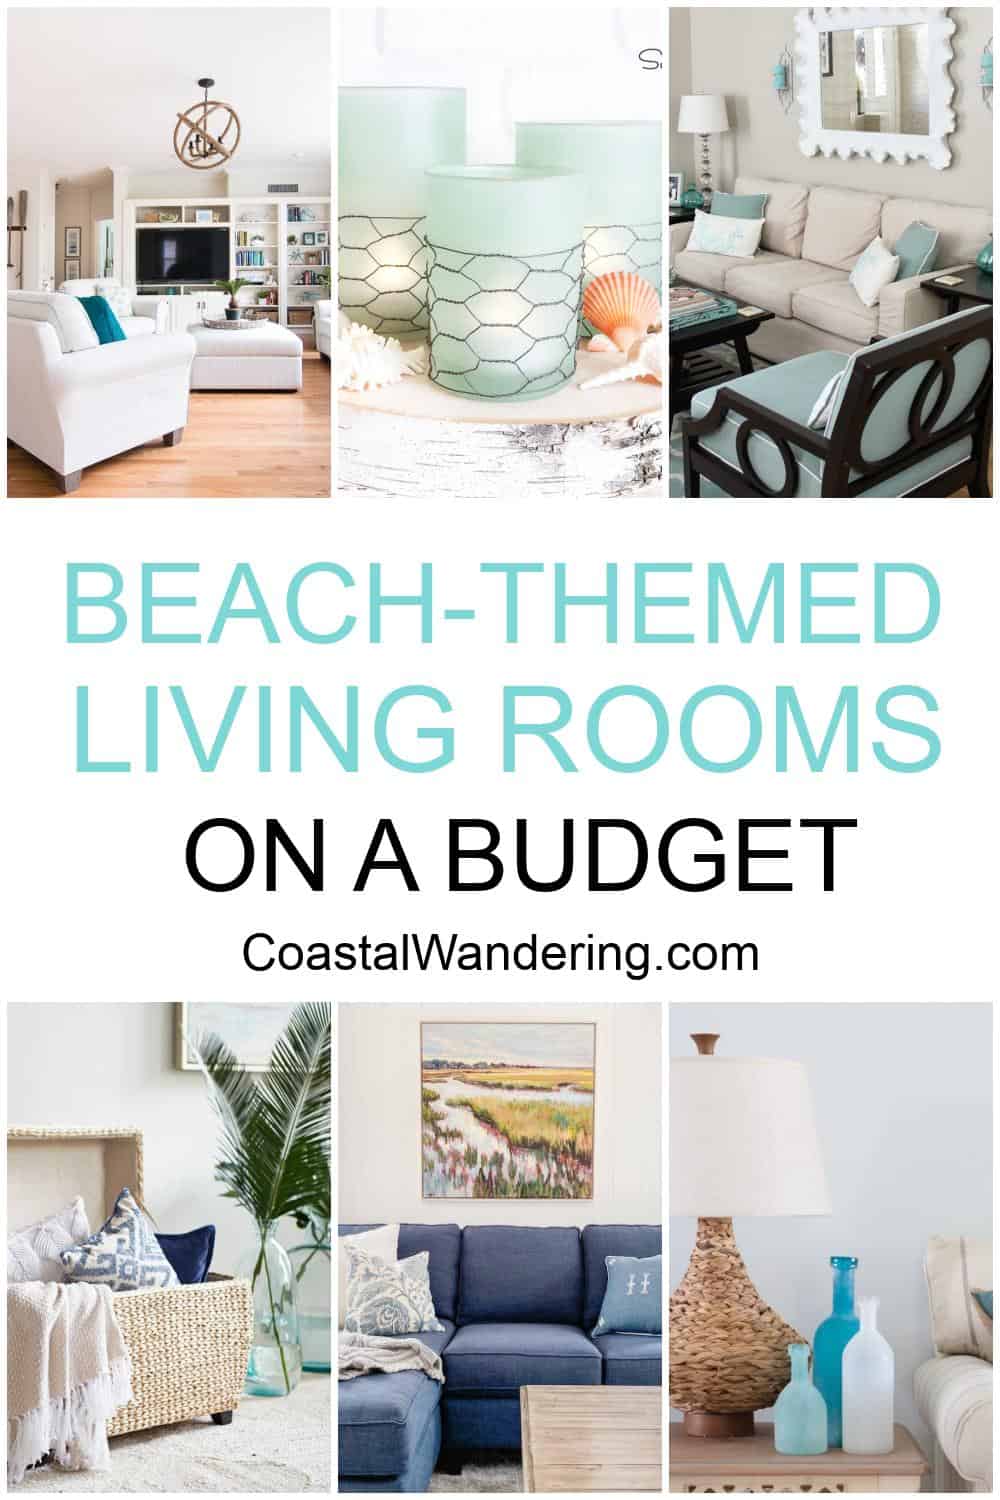 Beach-themed living rooms on a budget